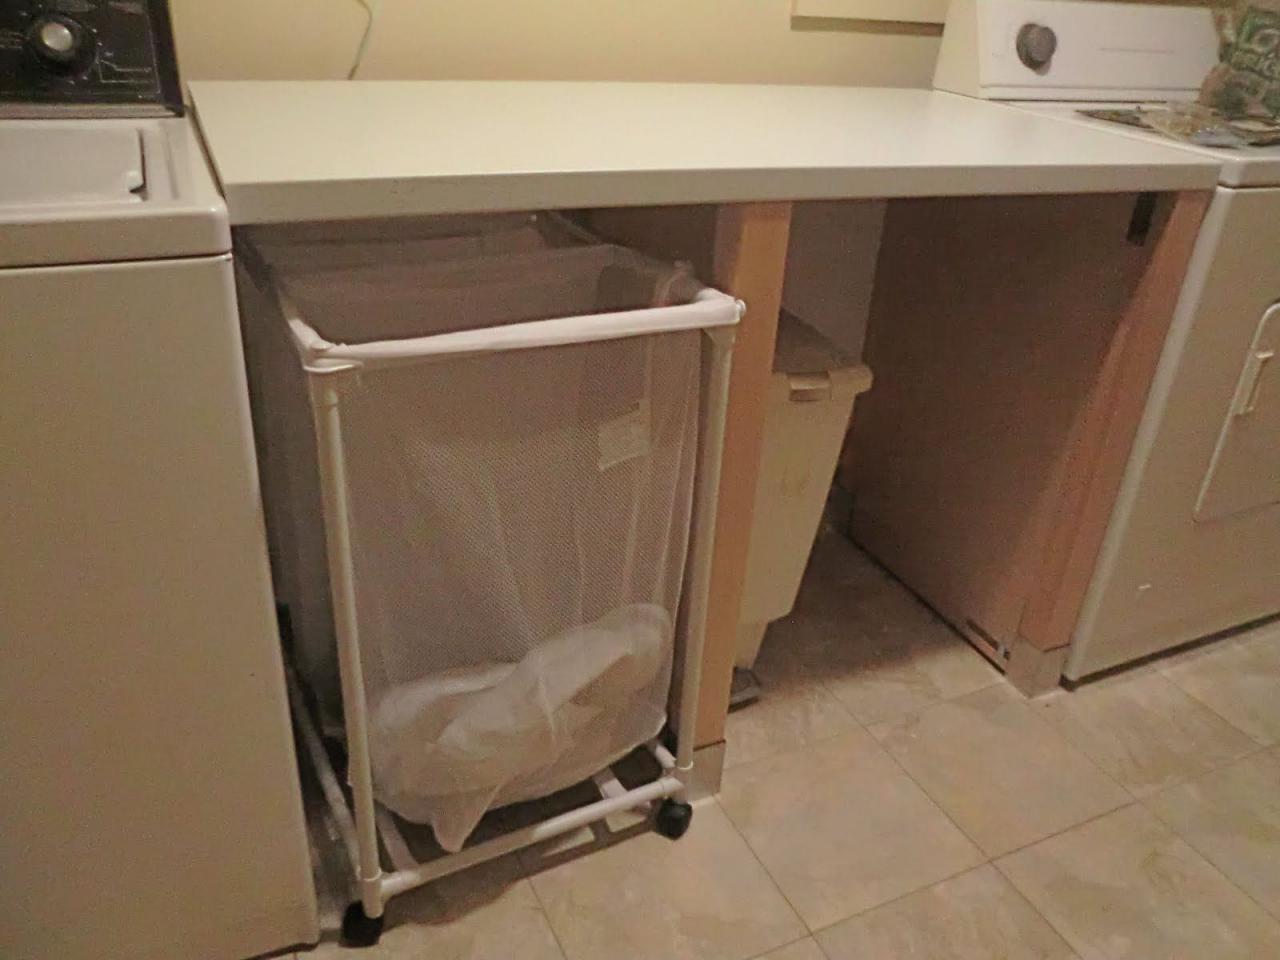 Laundry folding station out of a dishwasher IKEA Hackers